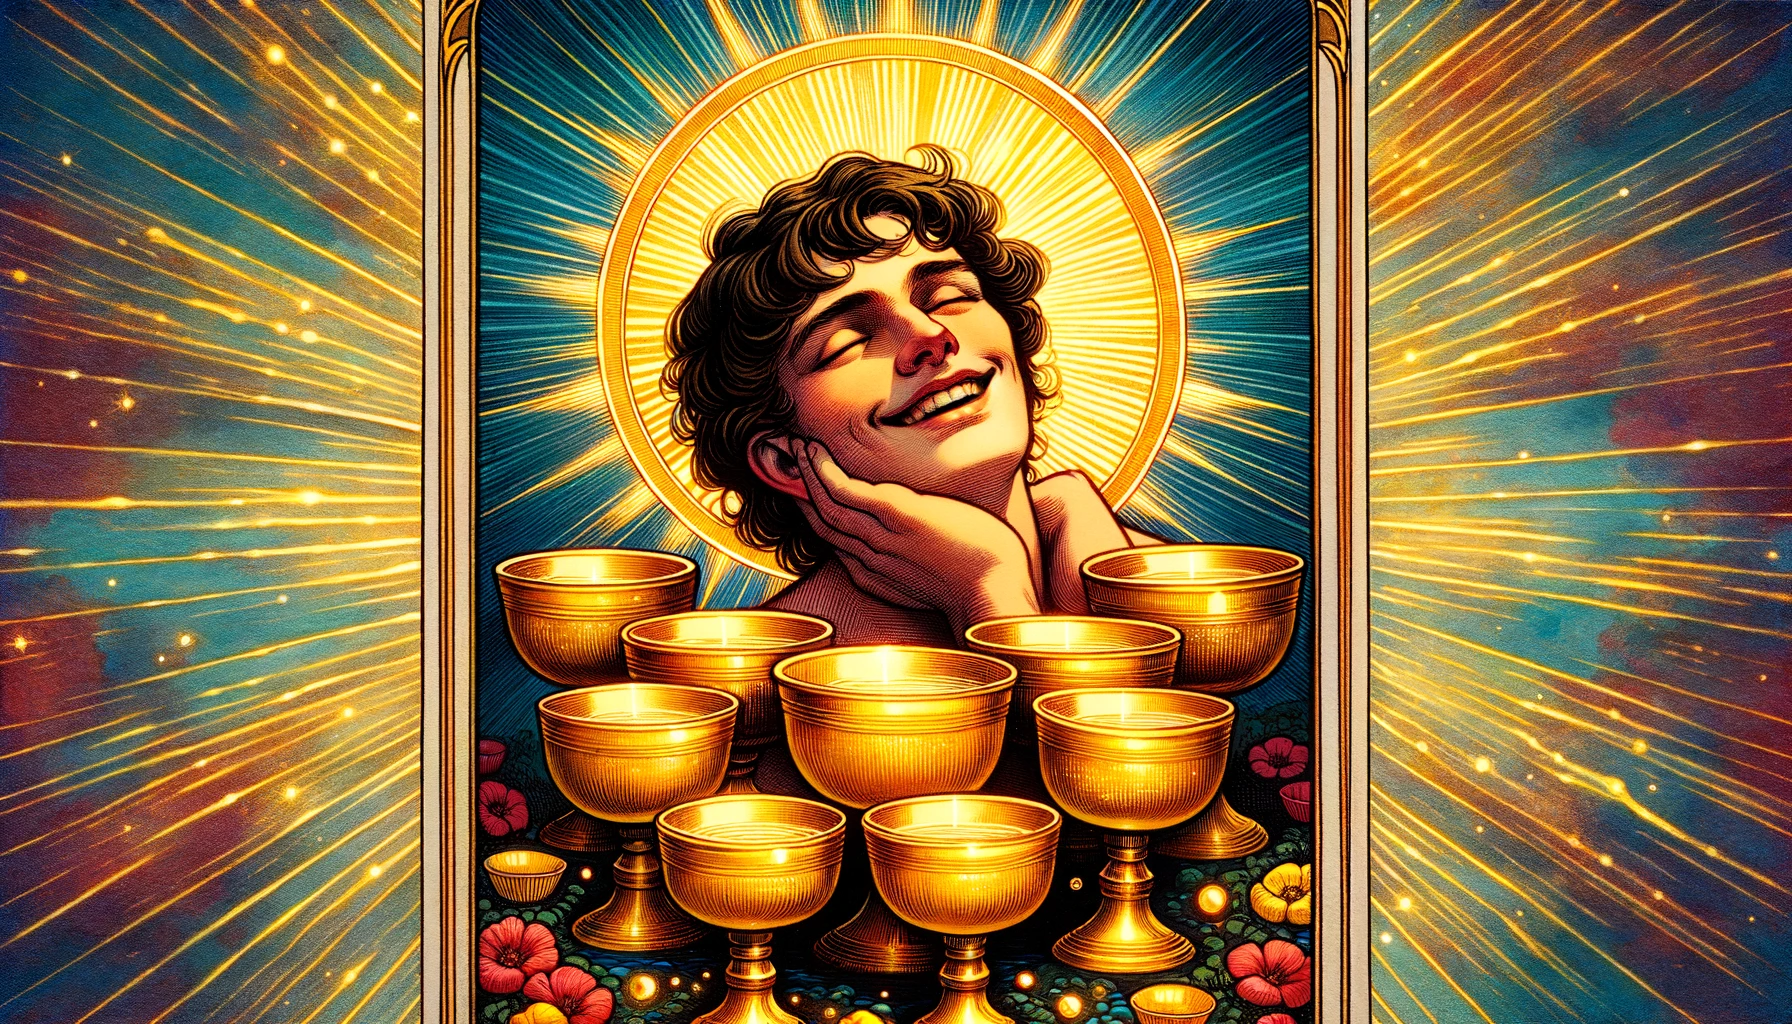 An image showcasing the Nine of Cups tarot card emphasizing its overall significance. The image should capture the cards vibrant colors the unconta